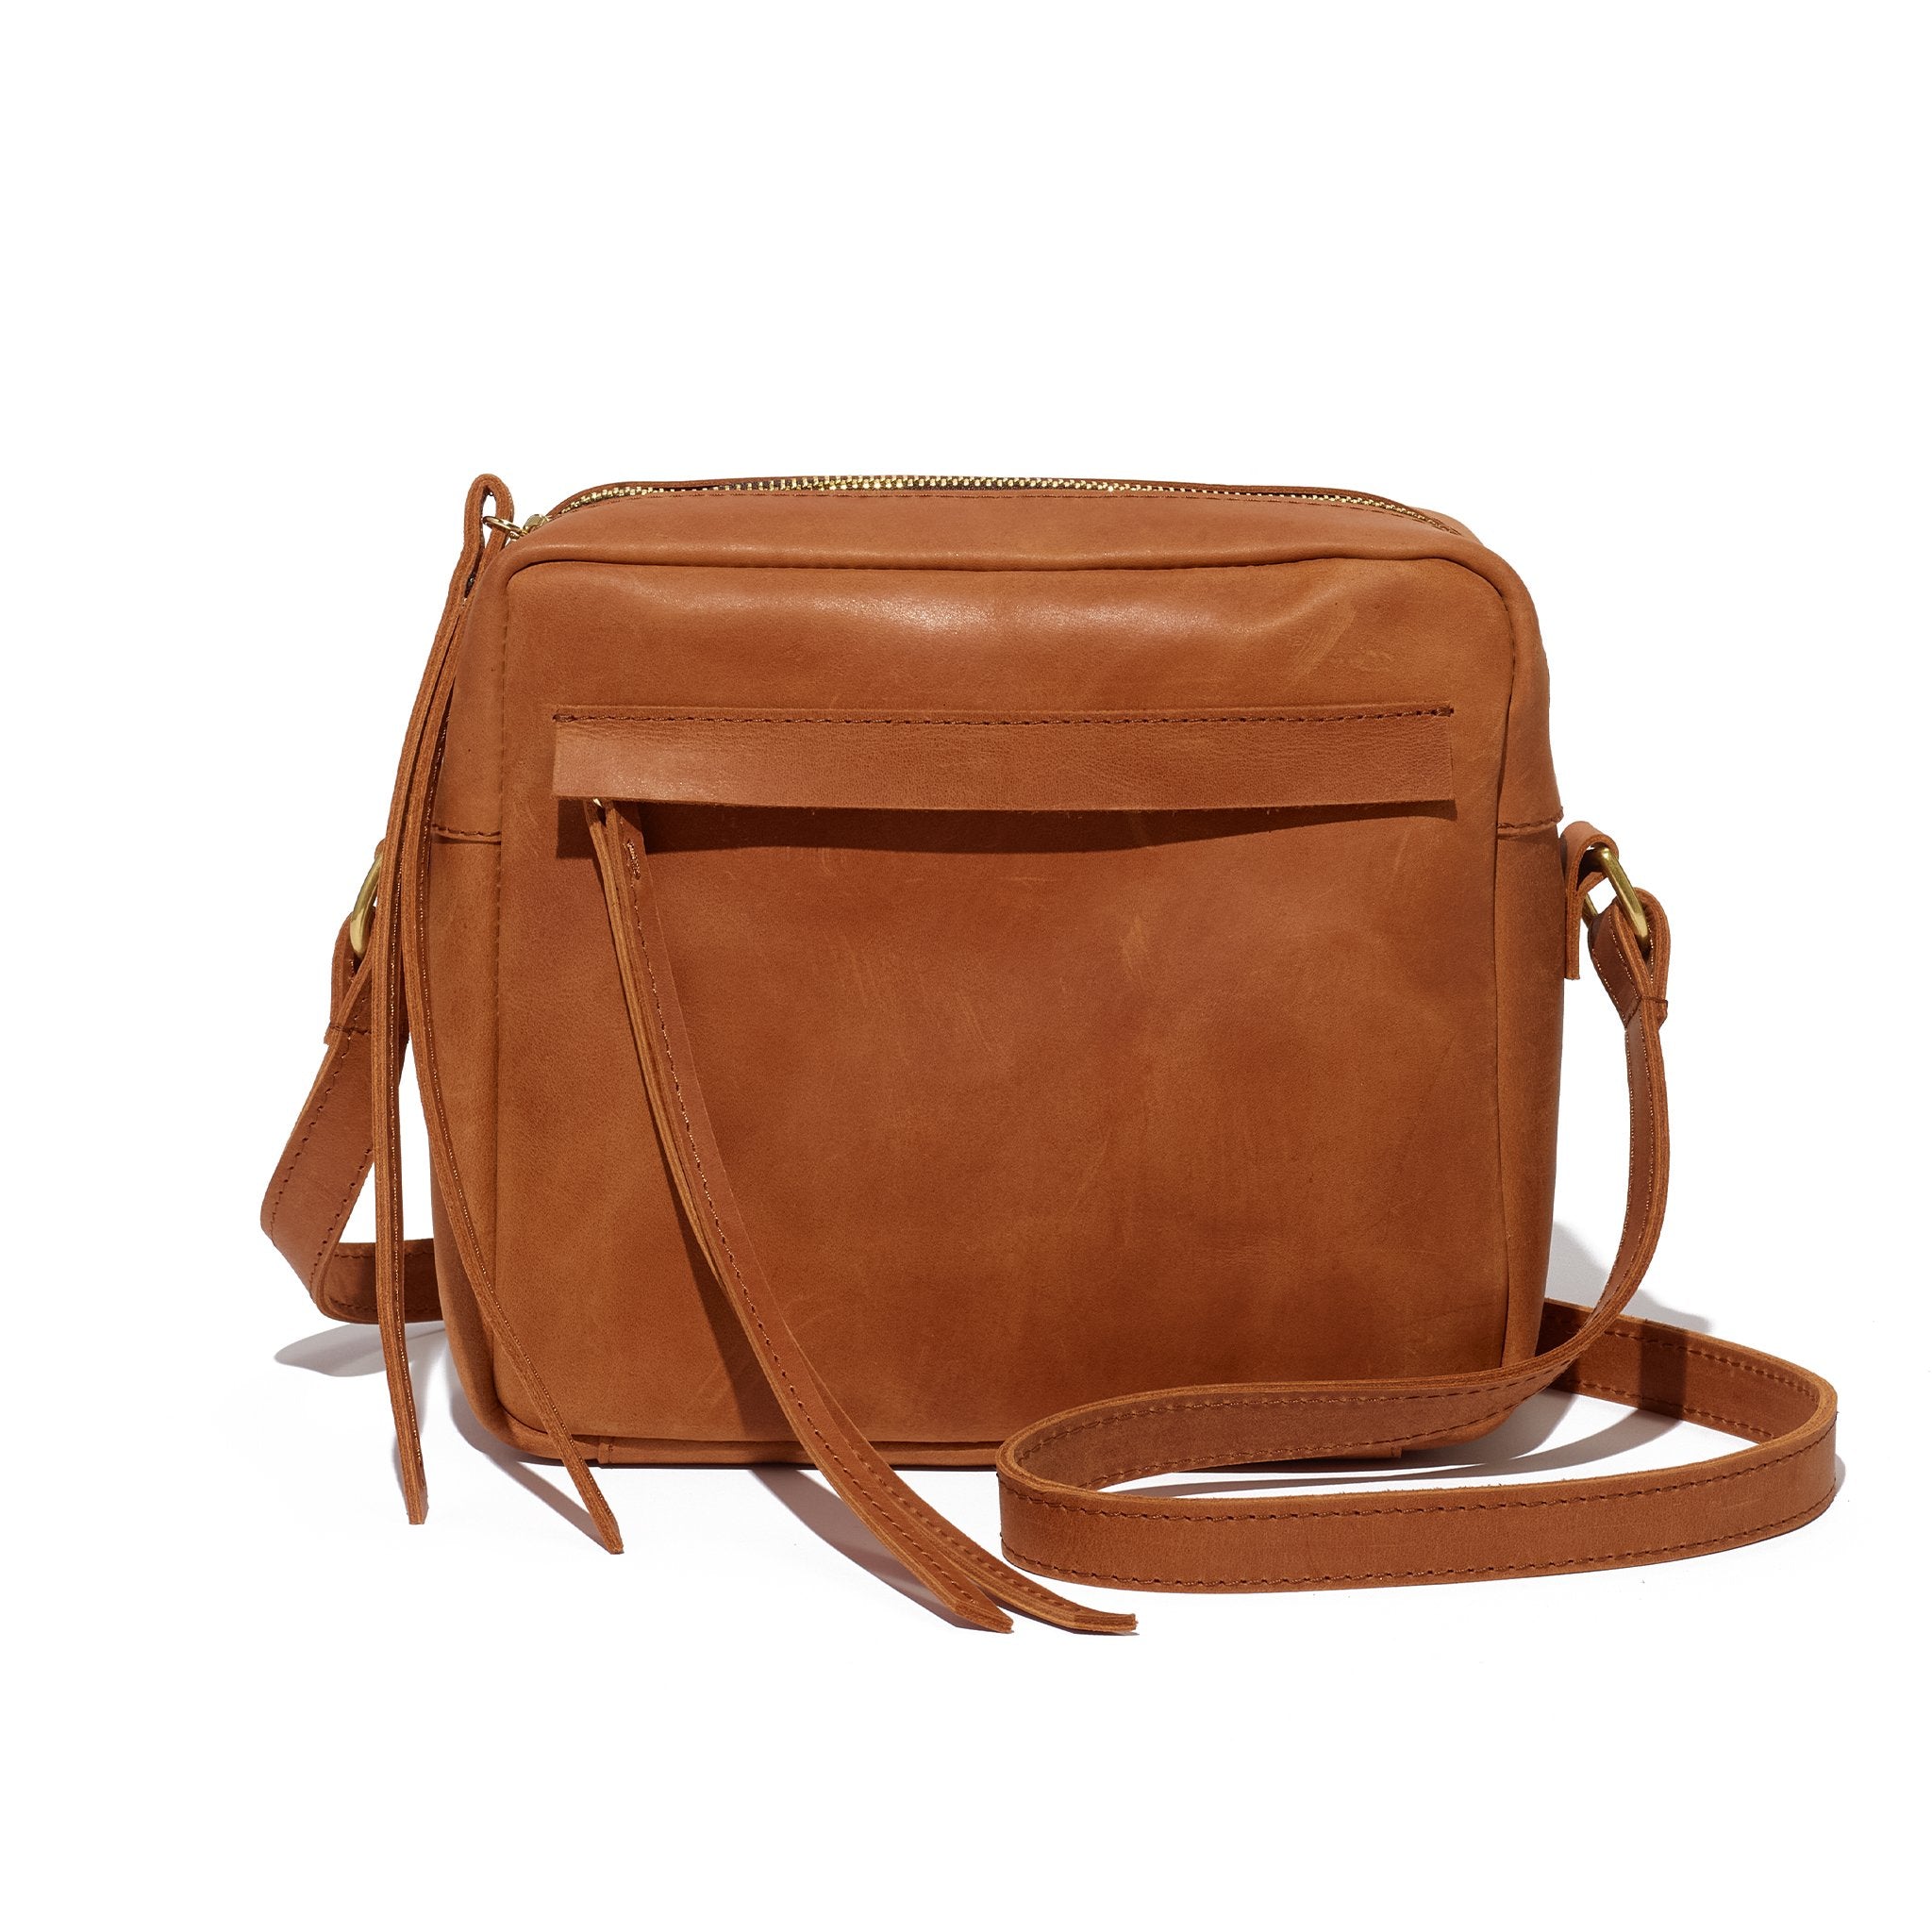 A brown crossbody camera bag handcrafted from sustainable leather and upcycled brass hardware, featuring a hand-loomed cotton lining and an interior pocket.